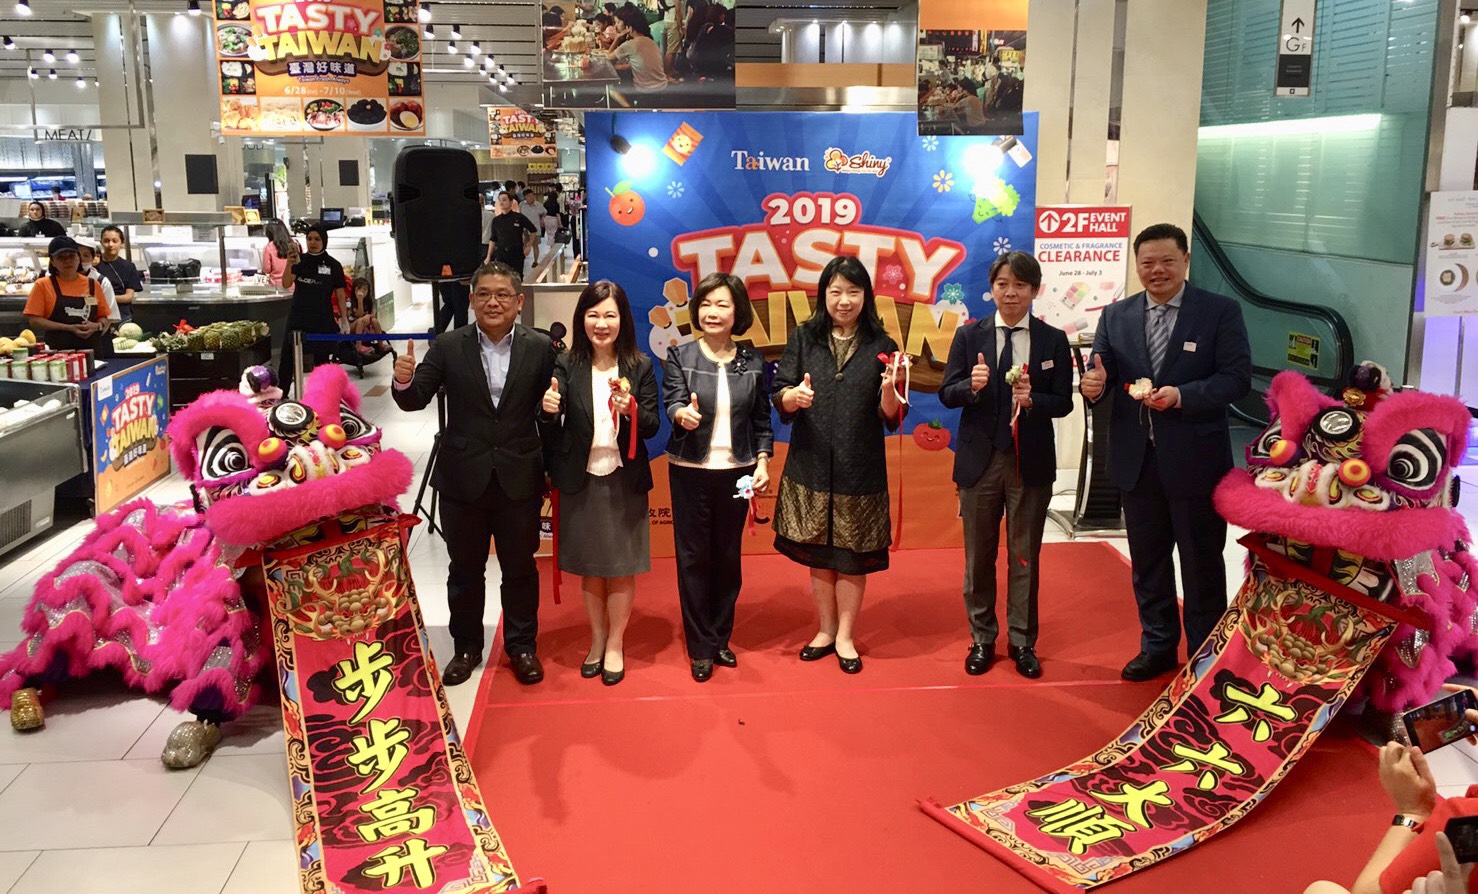 The opening ceremonies for the “2019 Tasty Taiwan” event at the Isetan department stores in Kuala Lumpur, Malaysia.